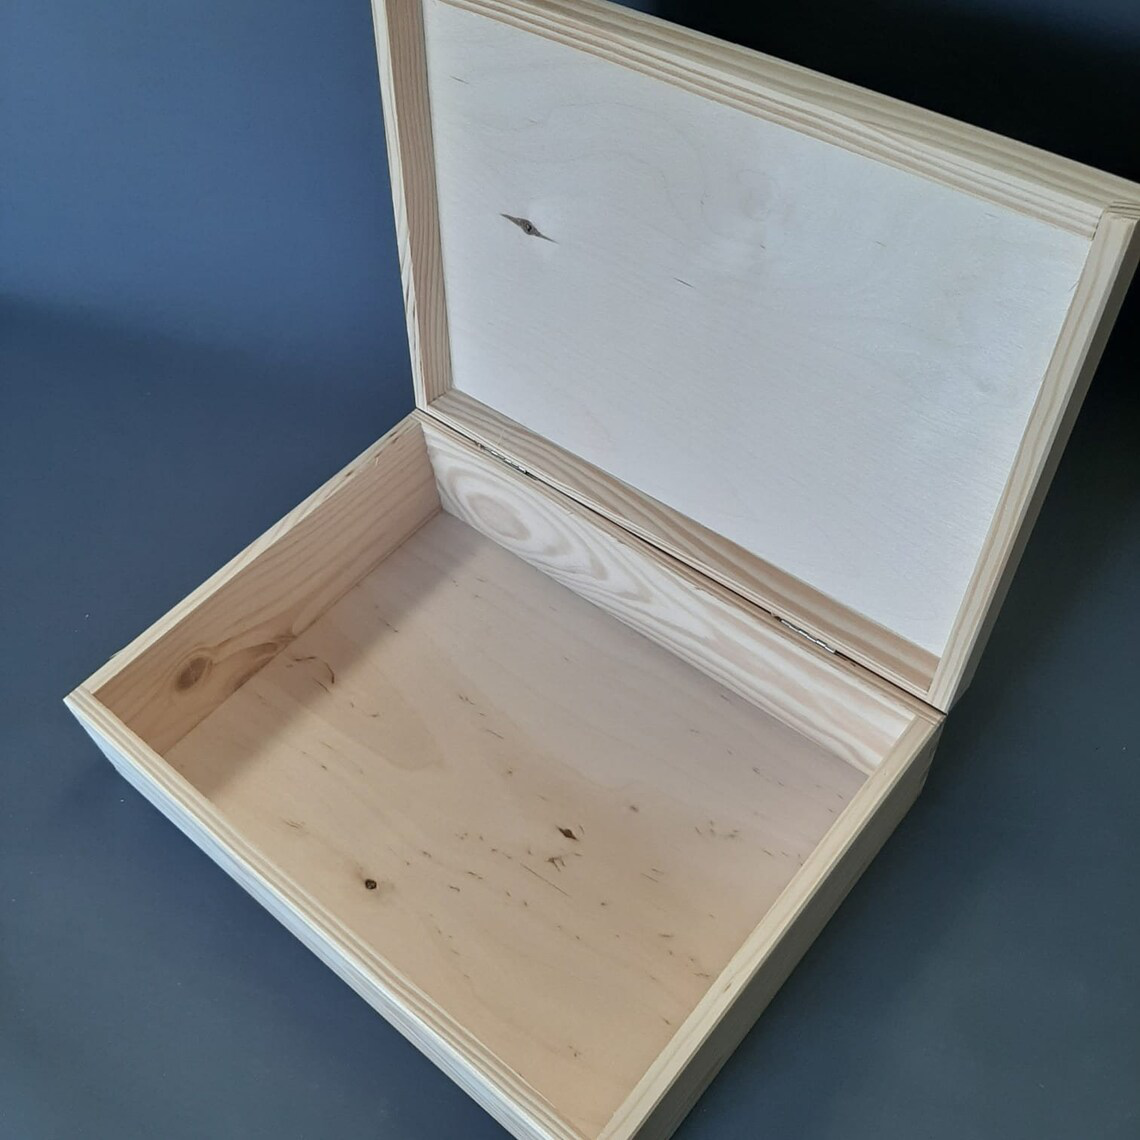 Arts and Crafts Wooden Boxes With Imperfections - Example 2